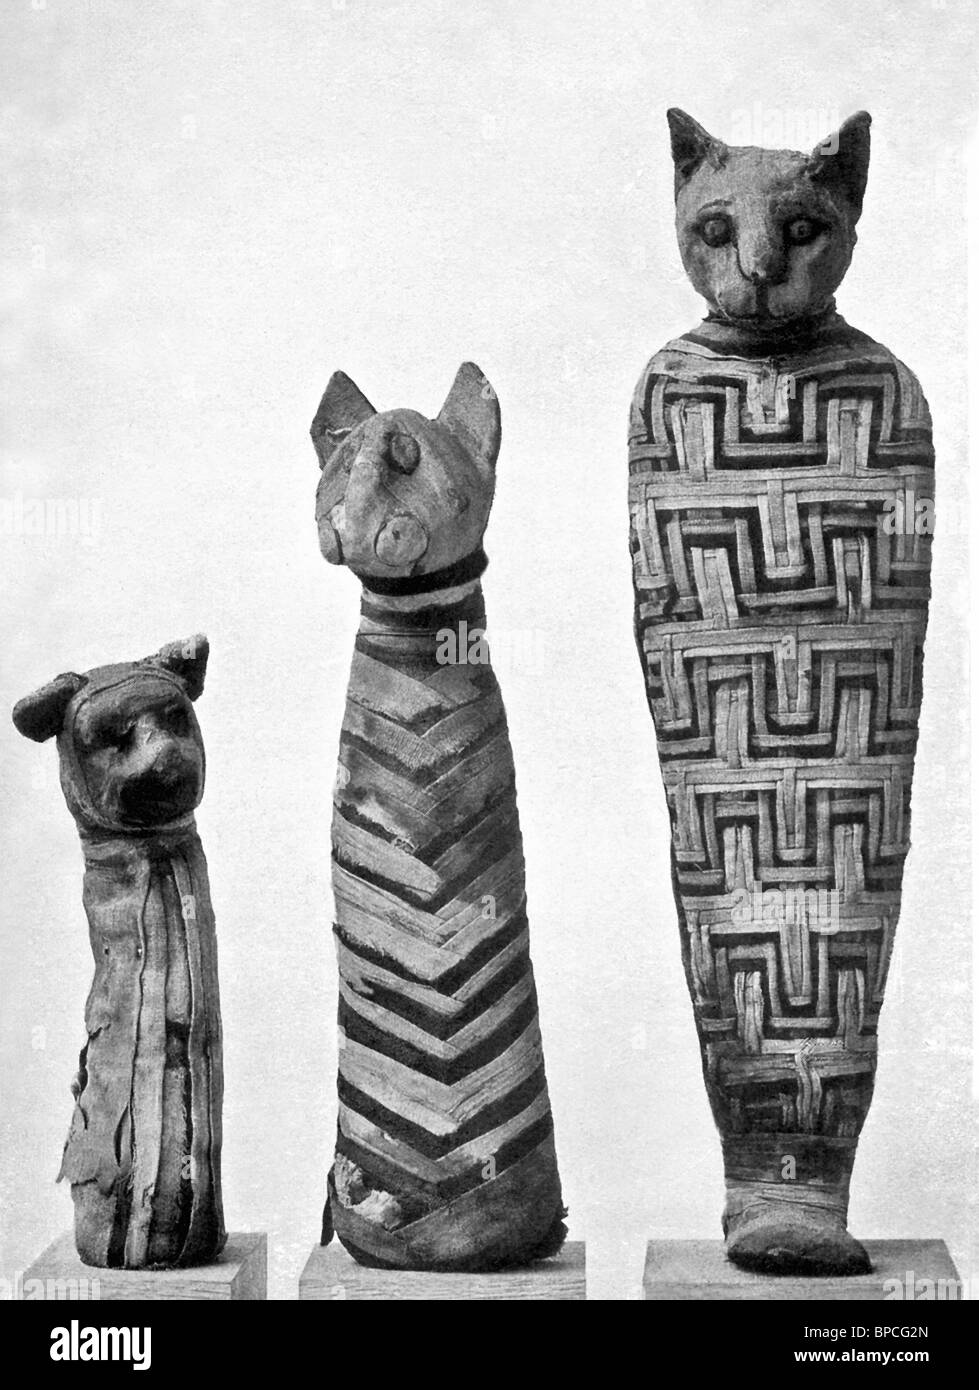 These three mummified ancient Egyptian cats are housed in the British Museum in London. Stock Photo